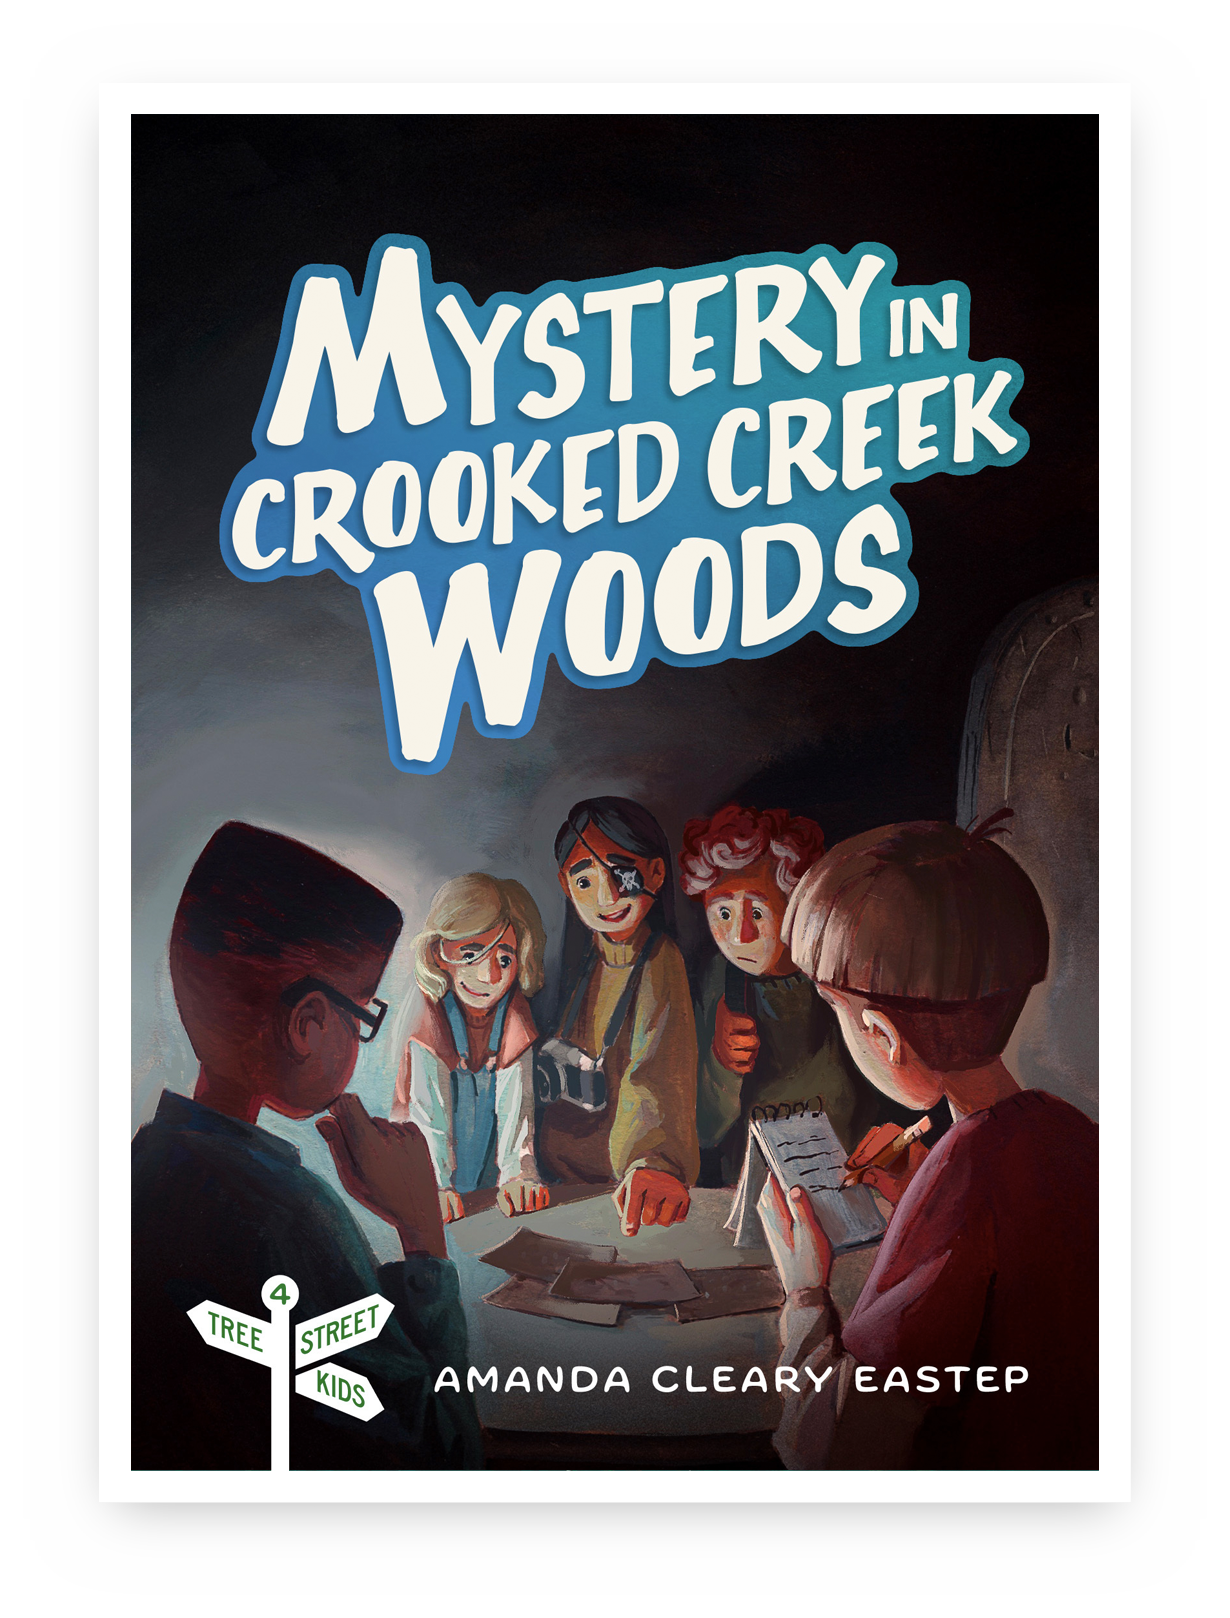 Mystery in Crooked Creek Woods Book